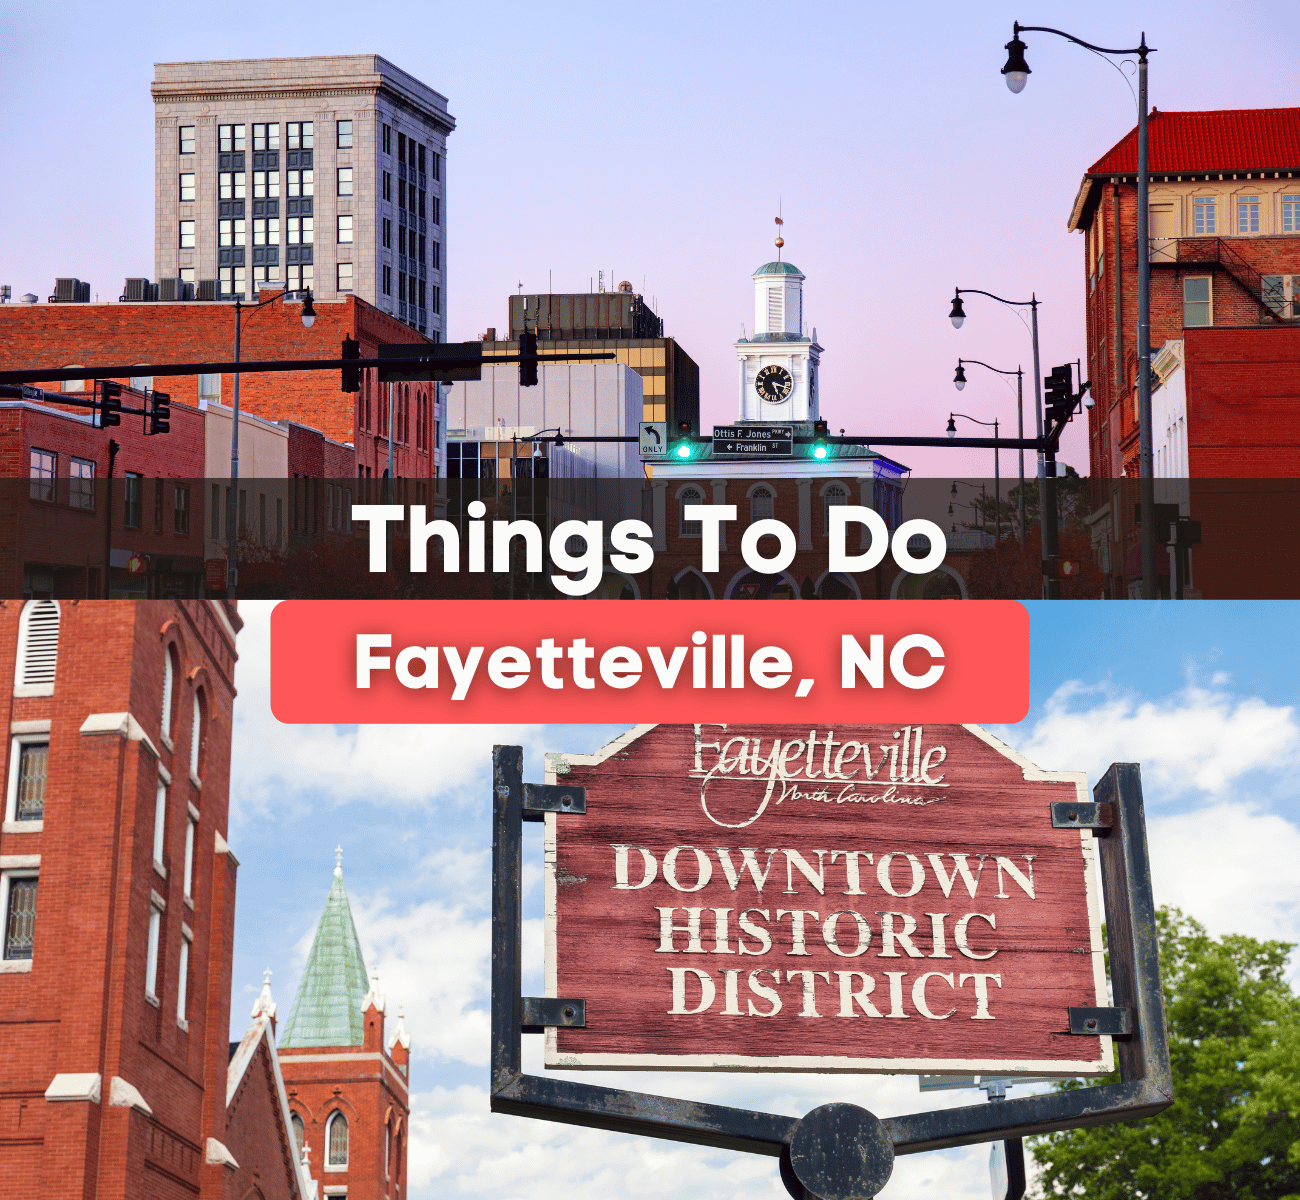 Downtown Fayetteville, NC and historic sign - Things to do in Fayetteville, NC